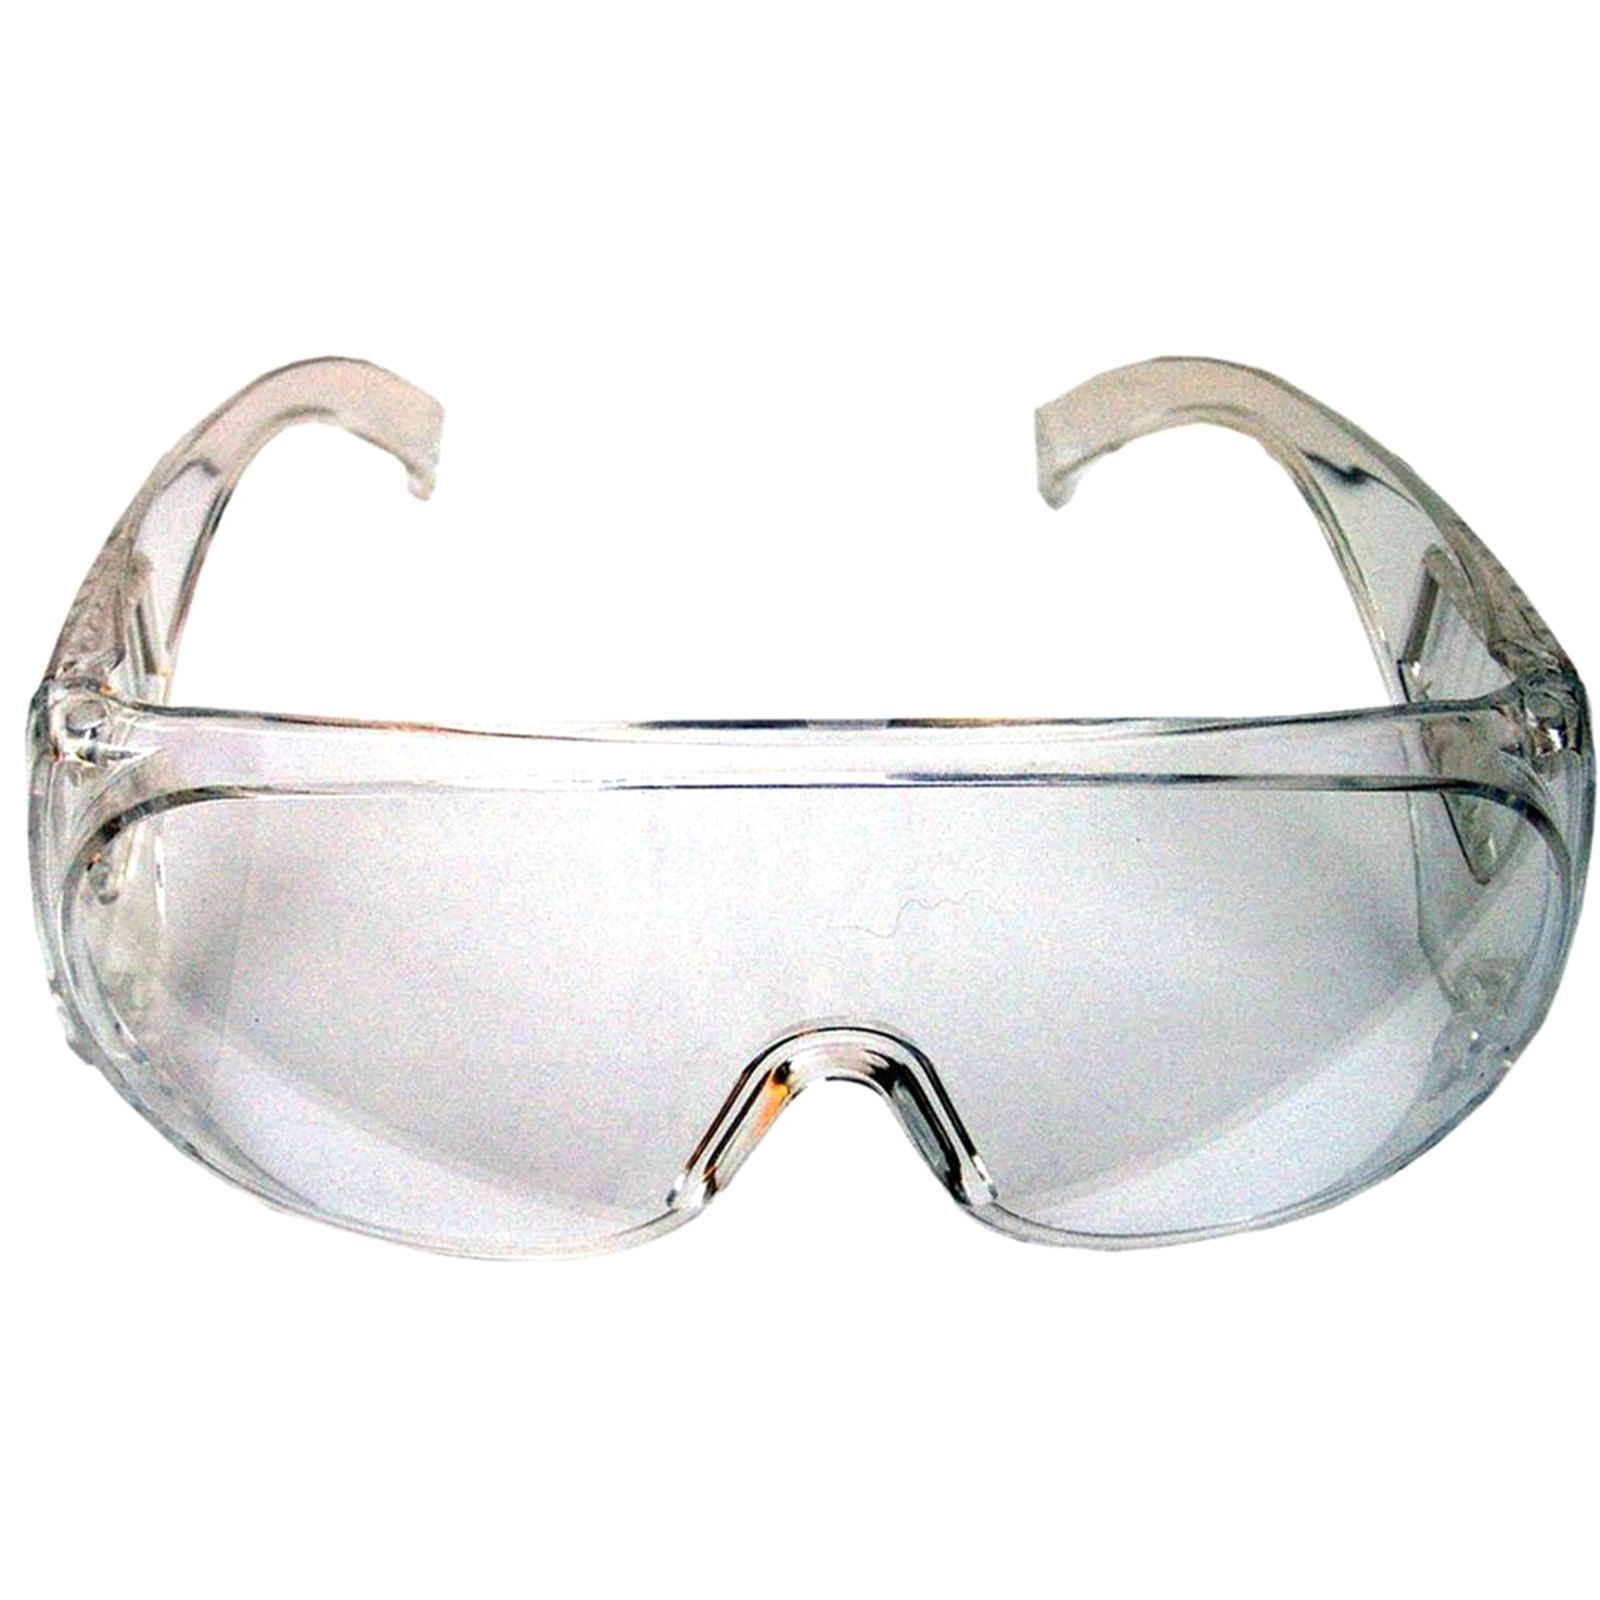 Morris Products 53000 Safety Glasses Fit Over Prescription Glasses